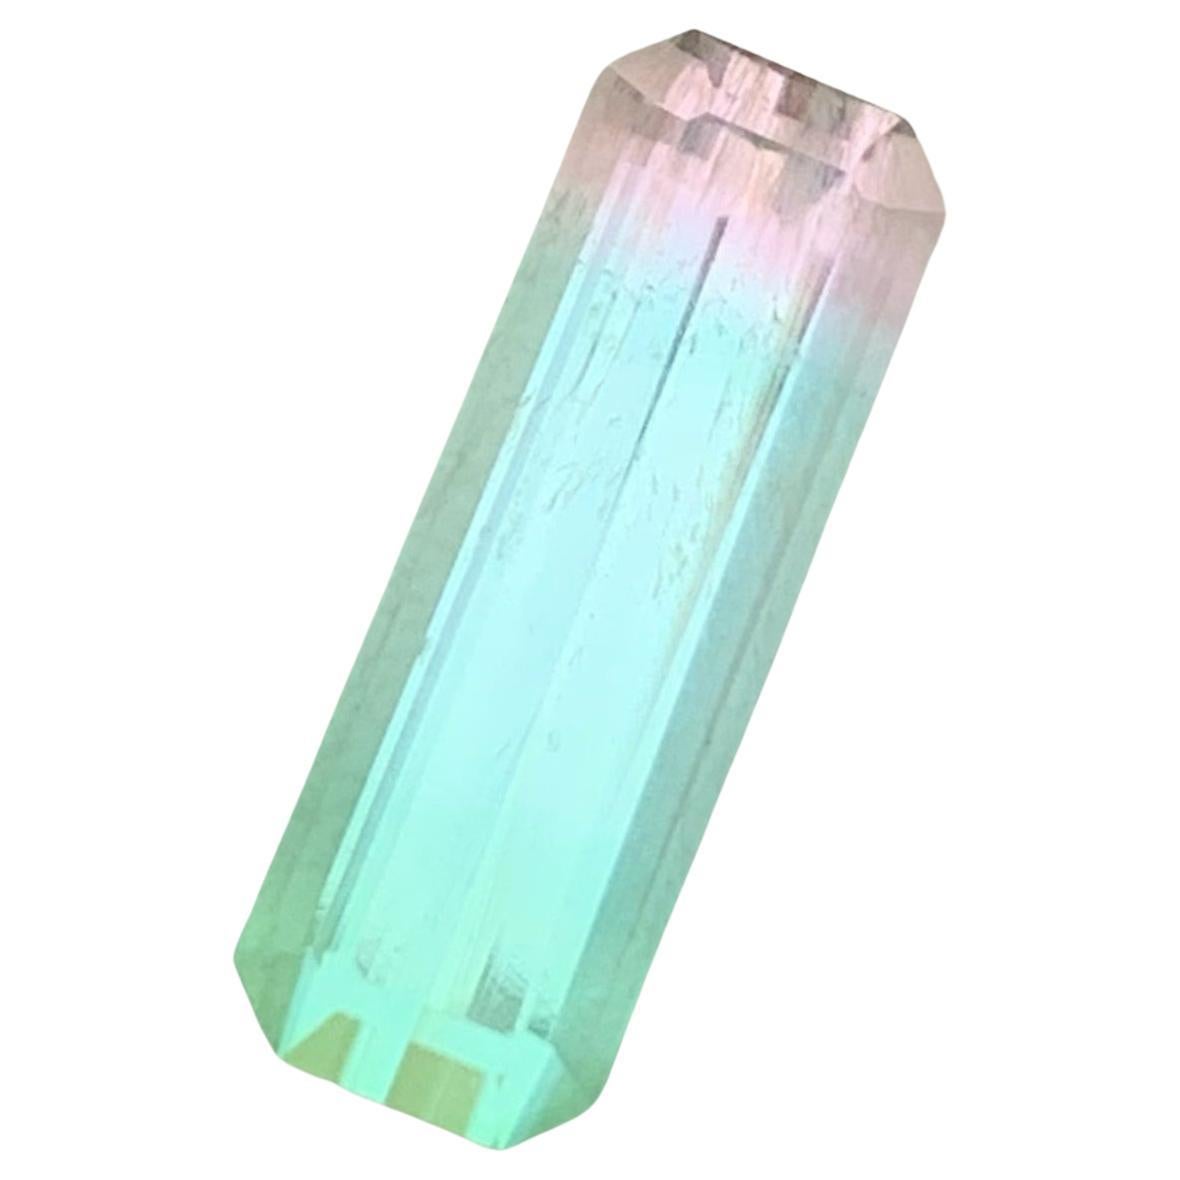 Beautiful Bicolor Loose Tourmaline Gemstone 3.25 CTS Tourmaline From Afghanistan For Sale